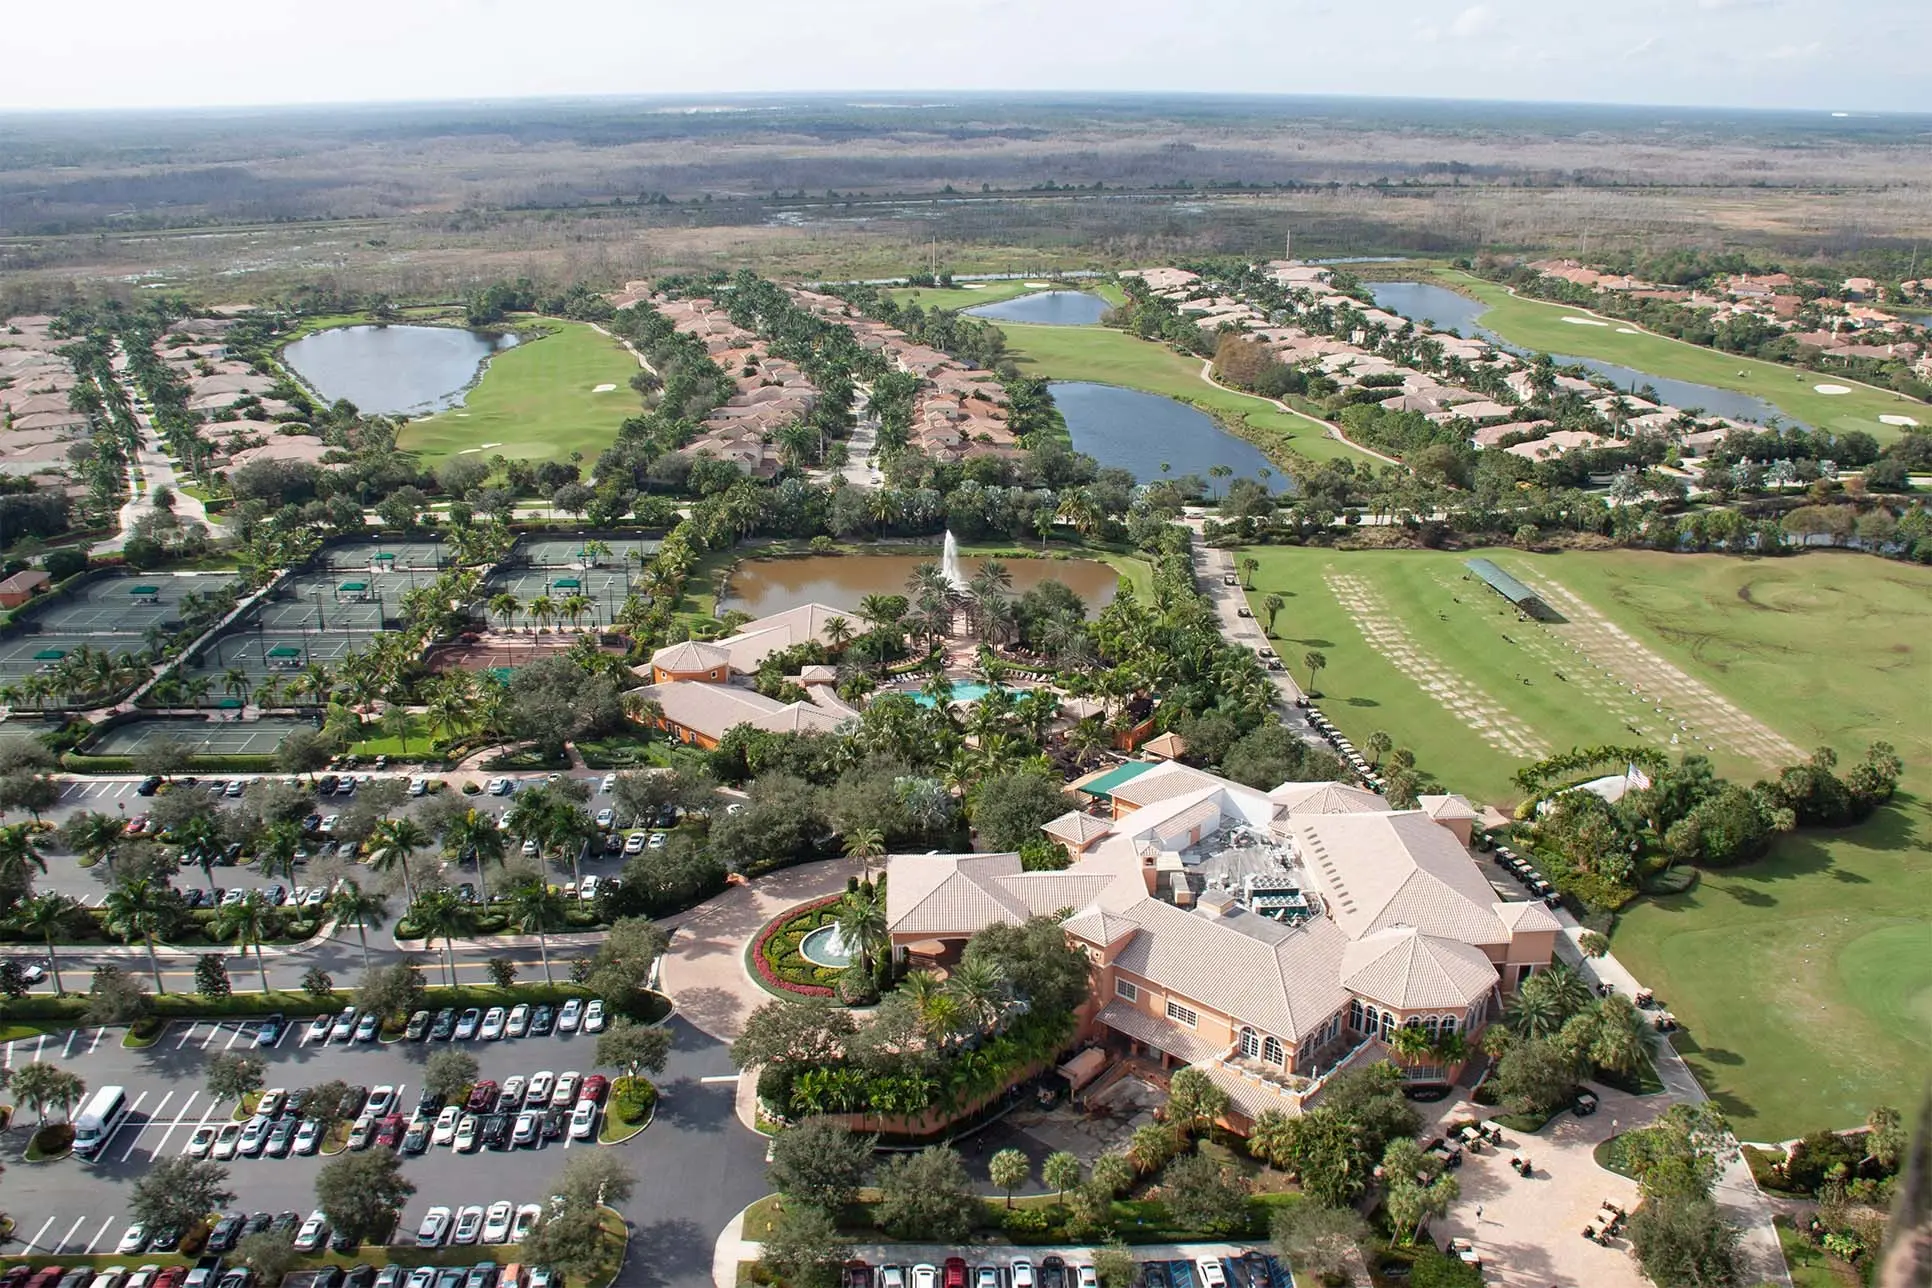 Mirasol Homes for Sale | Mirasol Country Club Homes for Sale